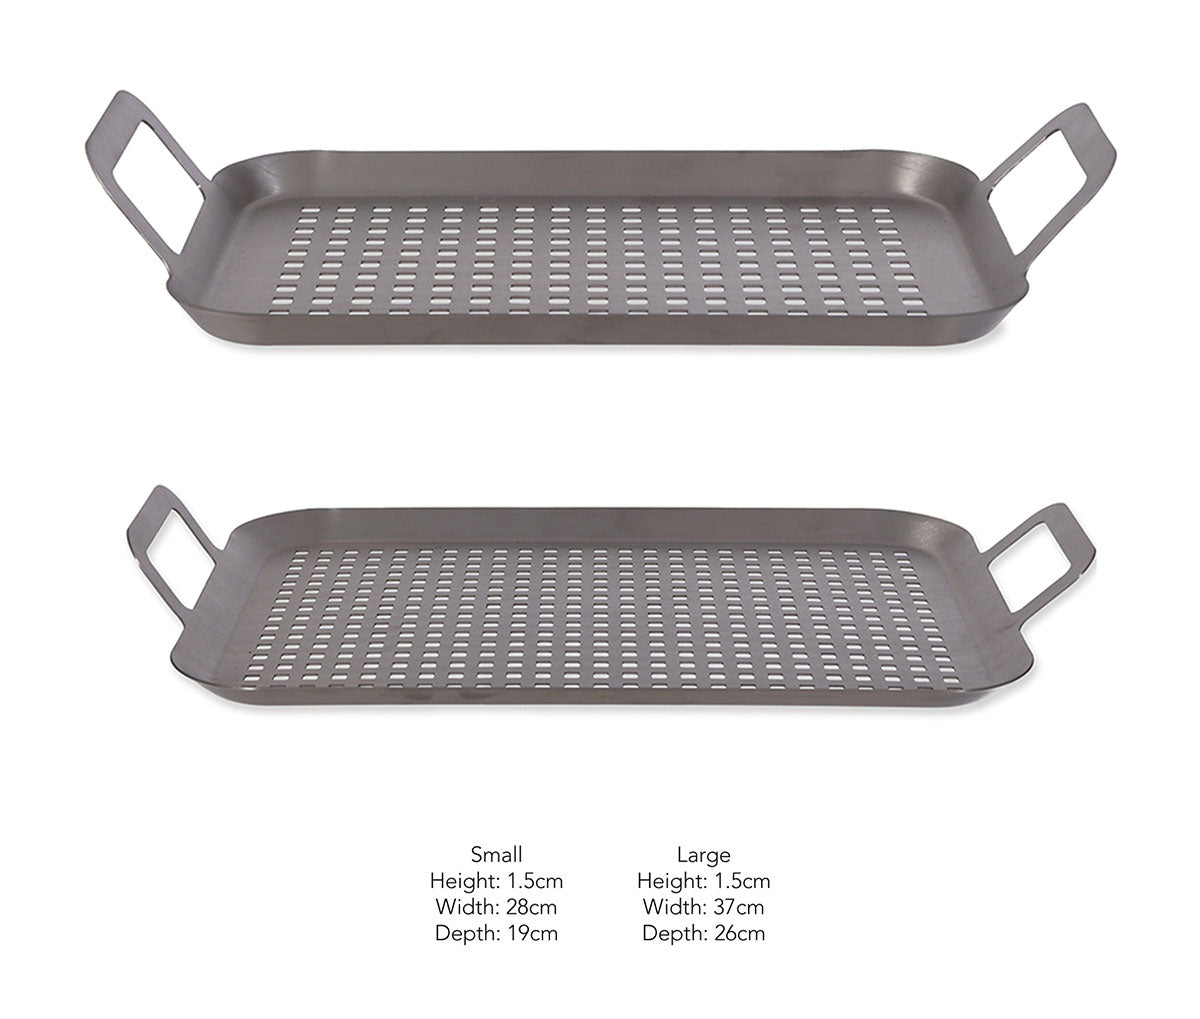 Garden Trading BBQ Trays | Set of 2 dimensions overview